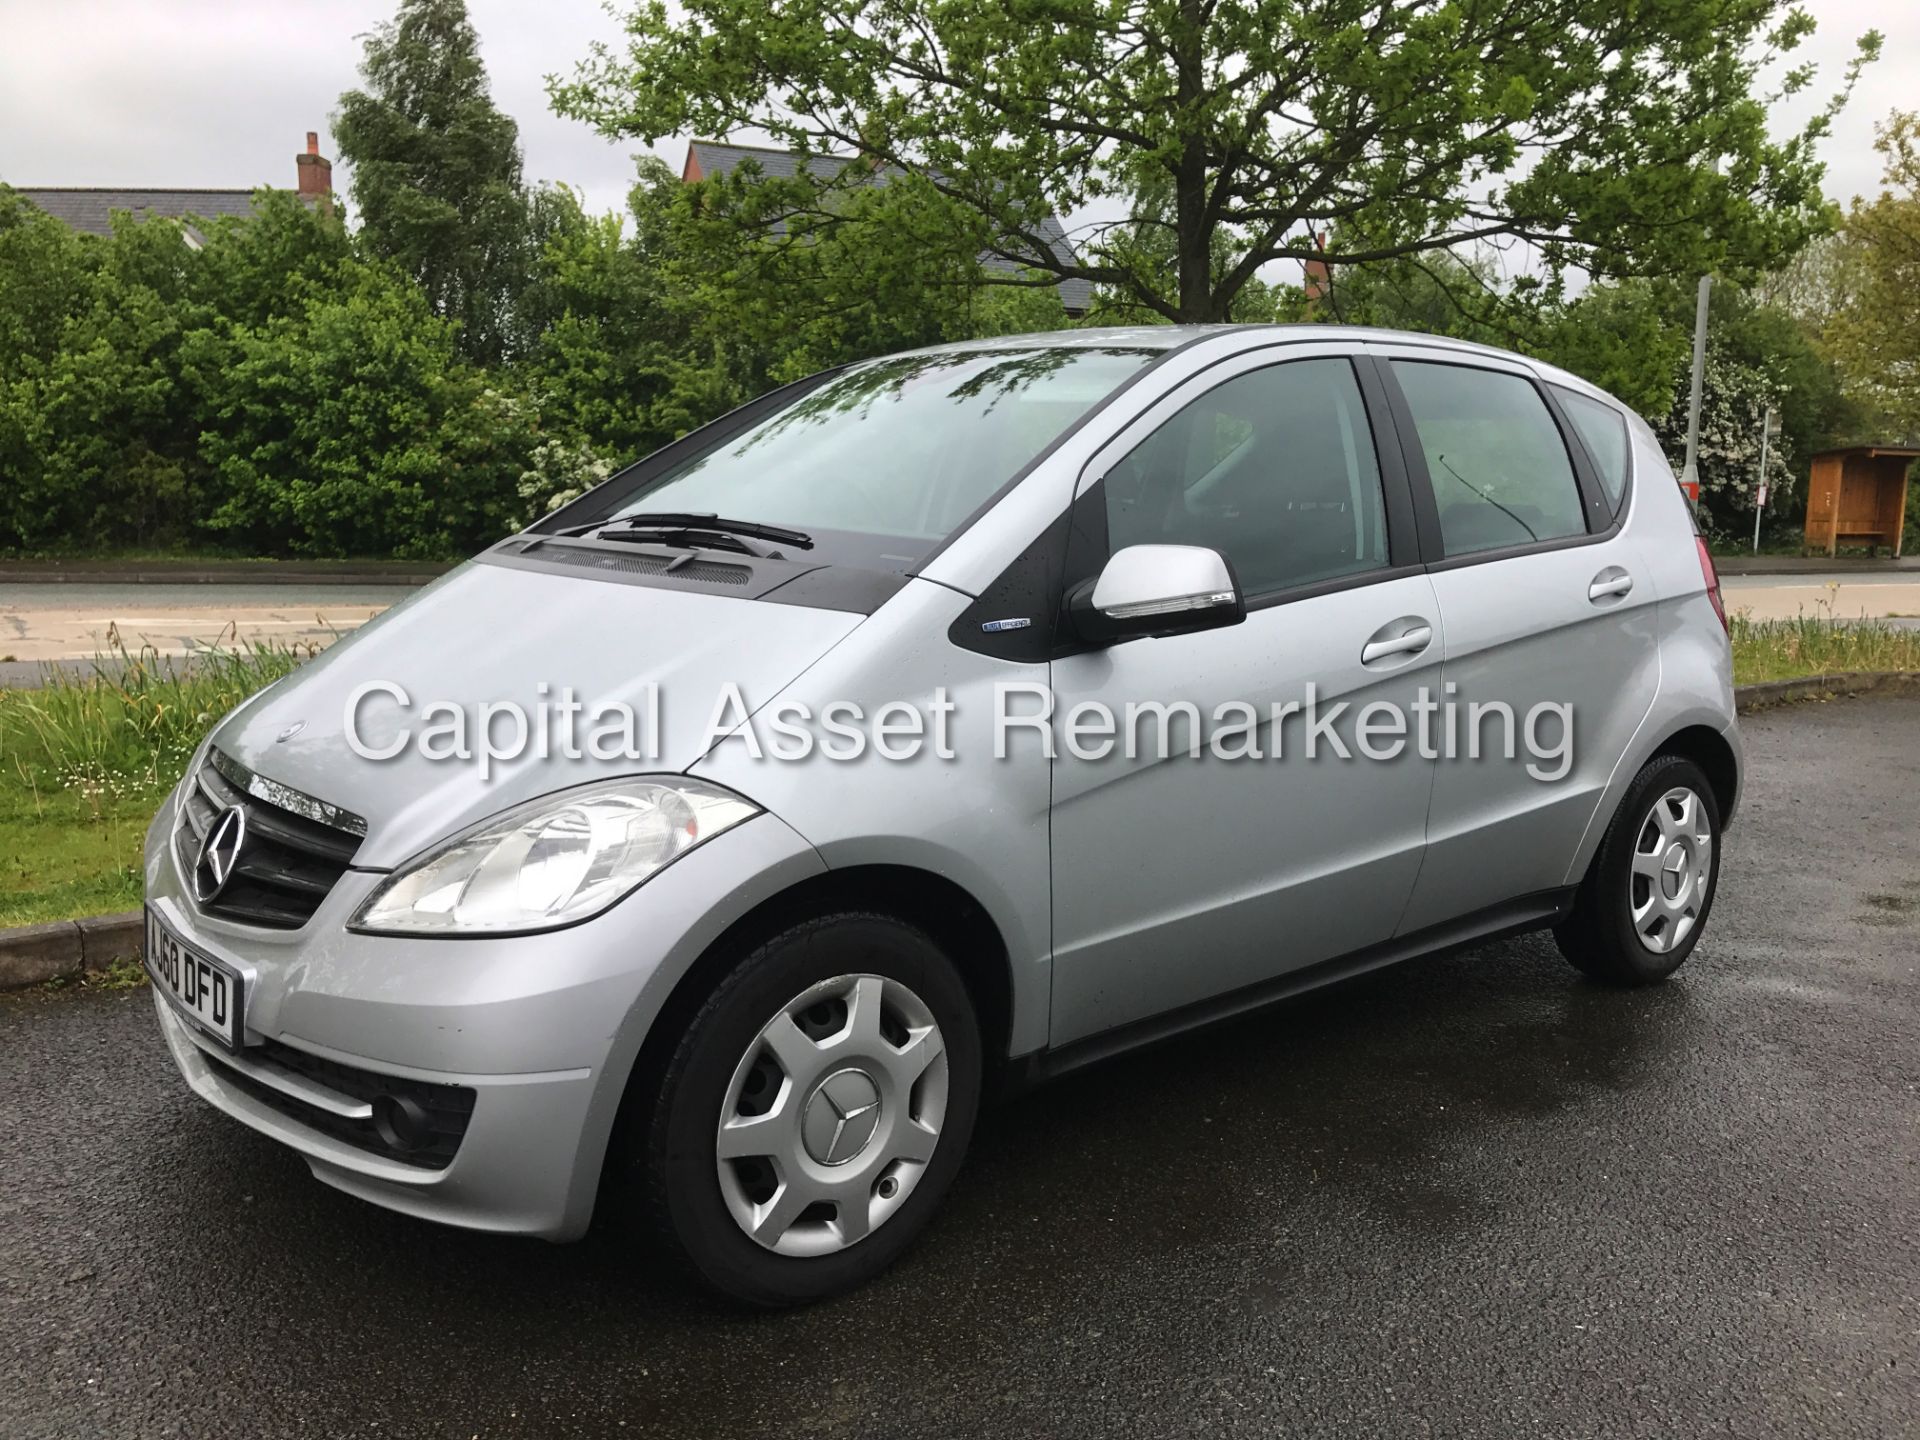 MERCEDES-BENZ A160 BLUEEFFICIENCY 'SE EDITION' (2011 MODEL) **LOW MILES** (55 MPG +) - Image 3 of 21